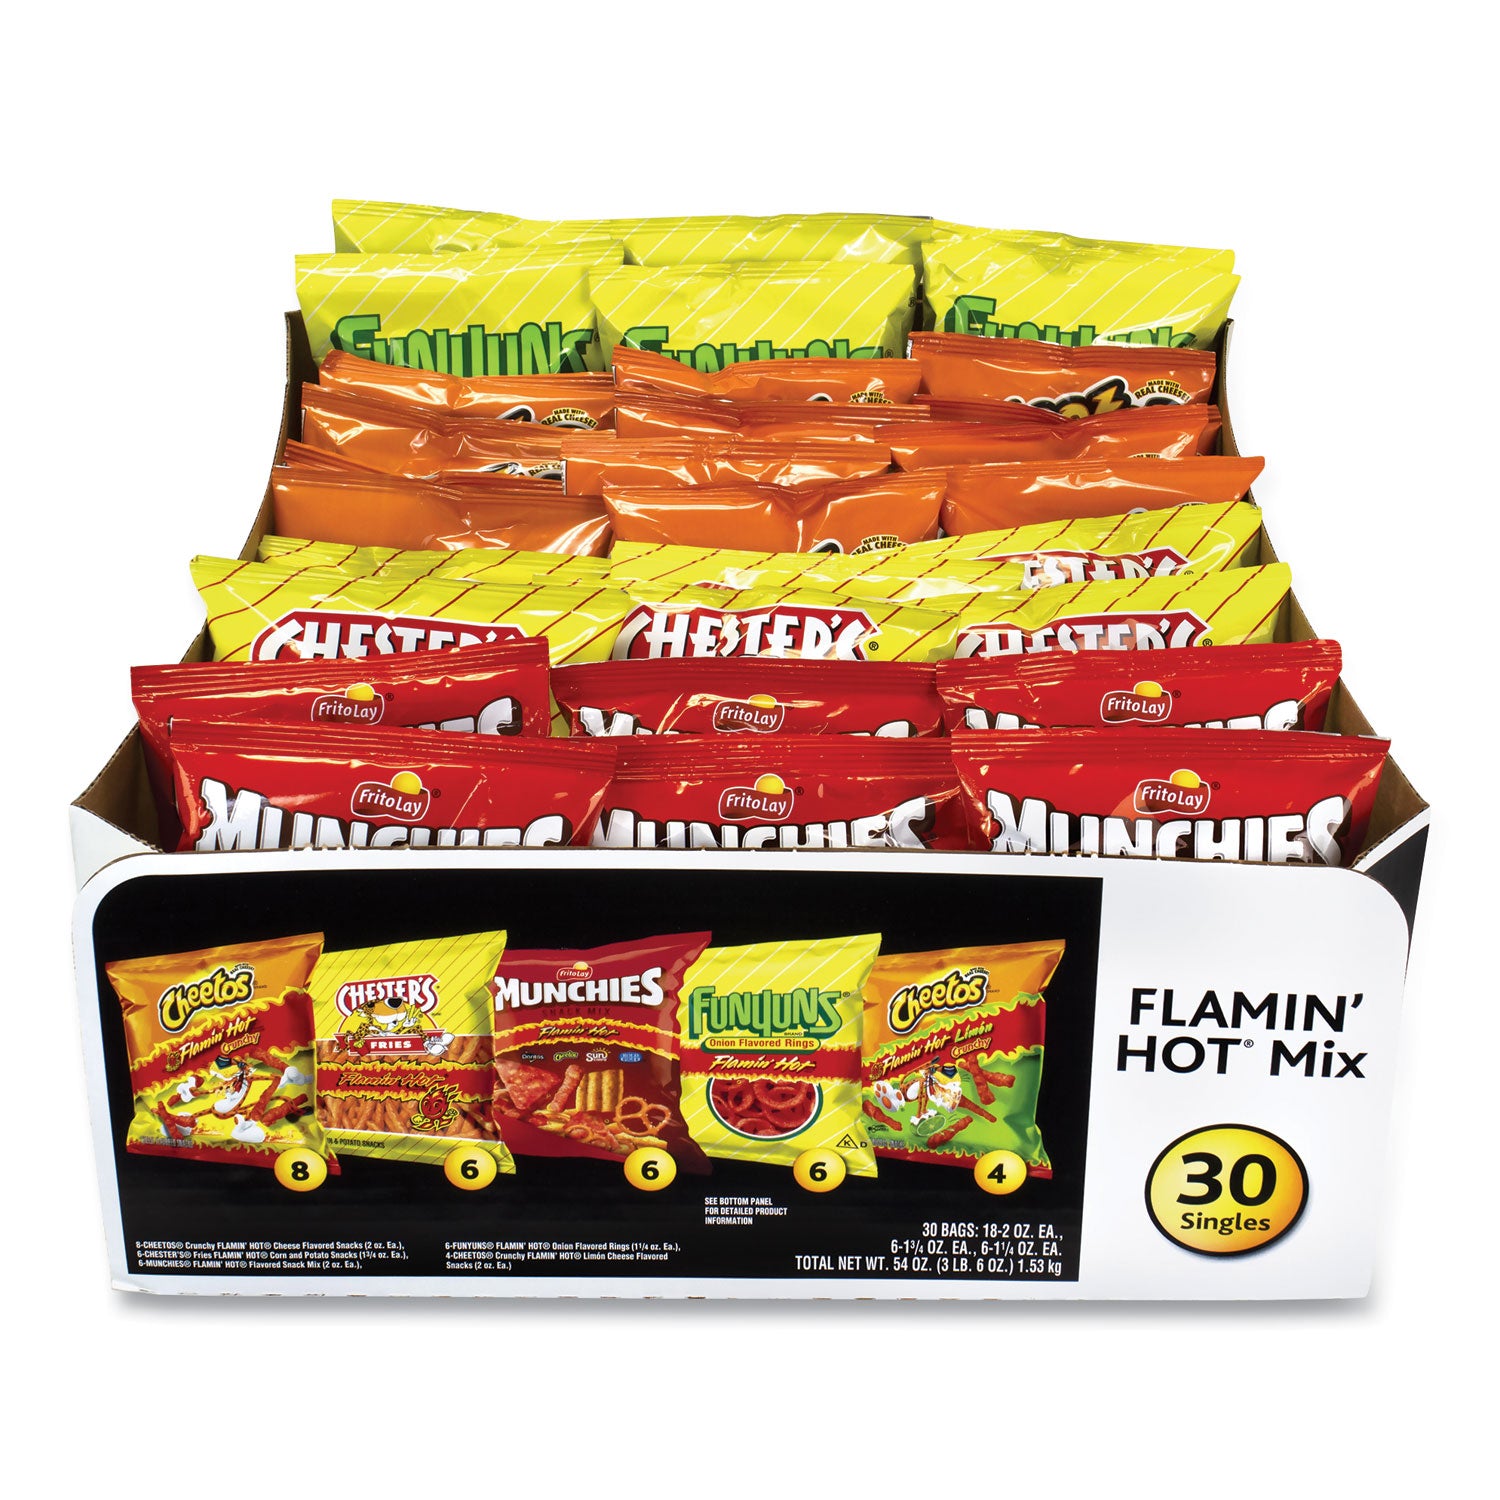 flamin-hot-mix-variety-pack-assorted-flavors-assorted-size-bag-30-bags-carton-ships-in-1-3-business-days_grr29500007 - 1